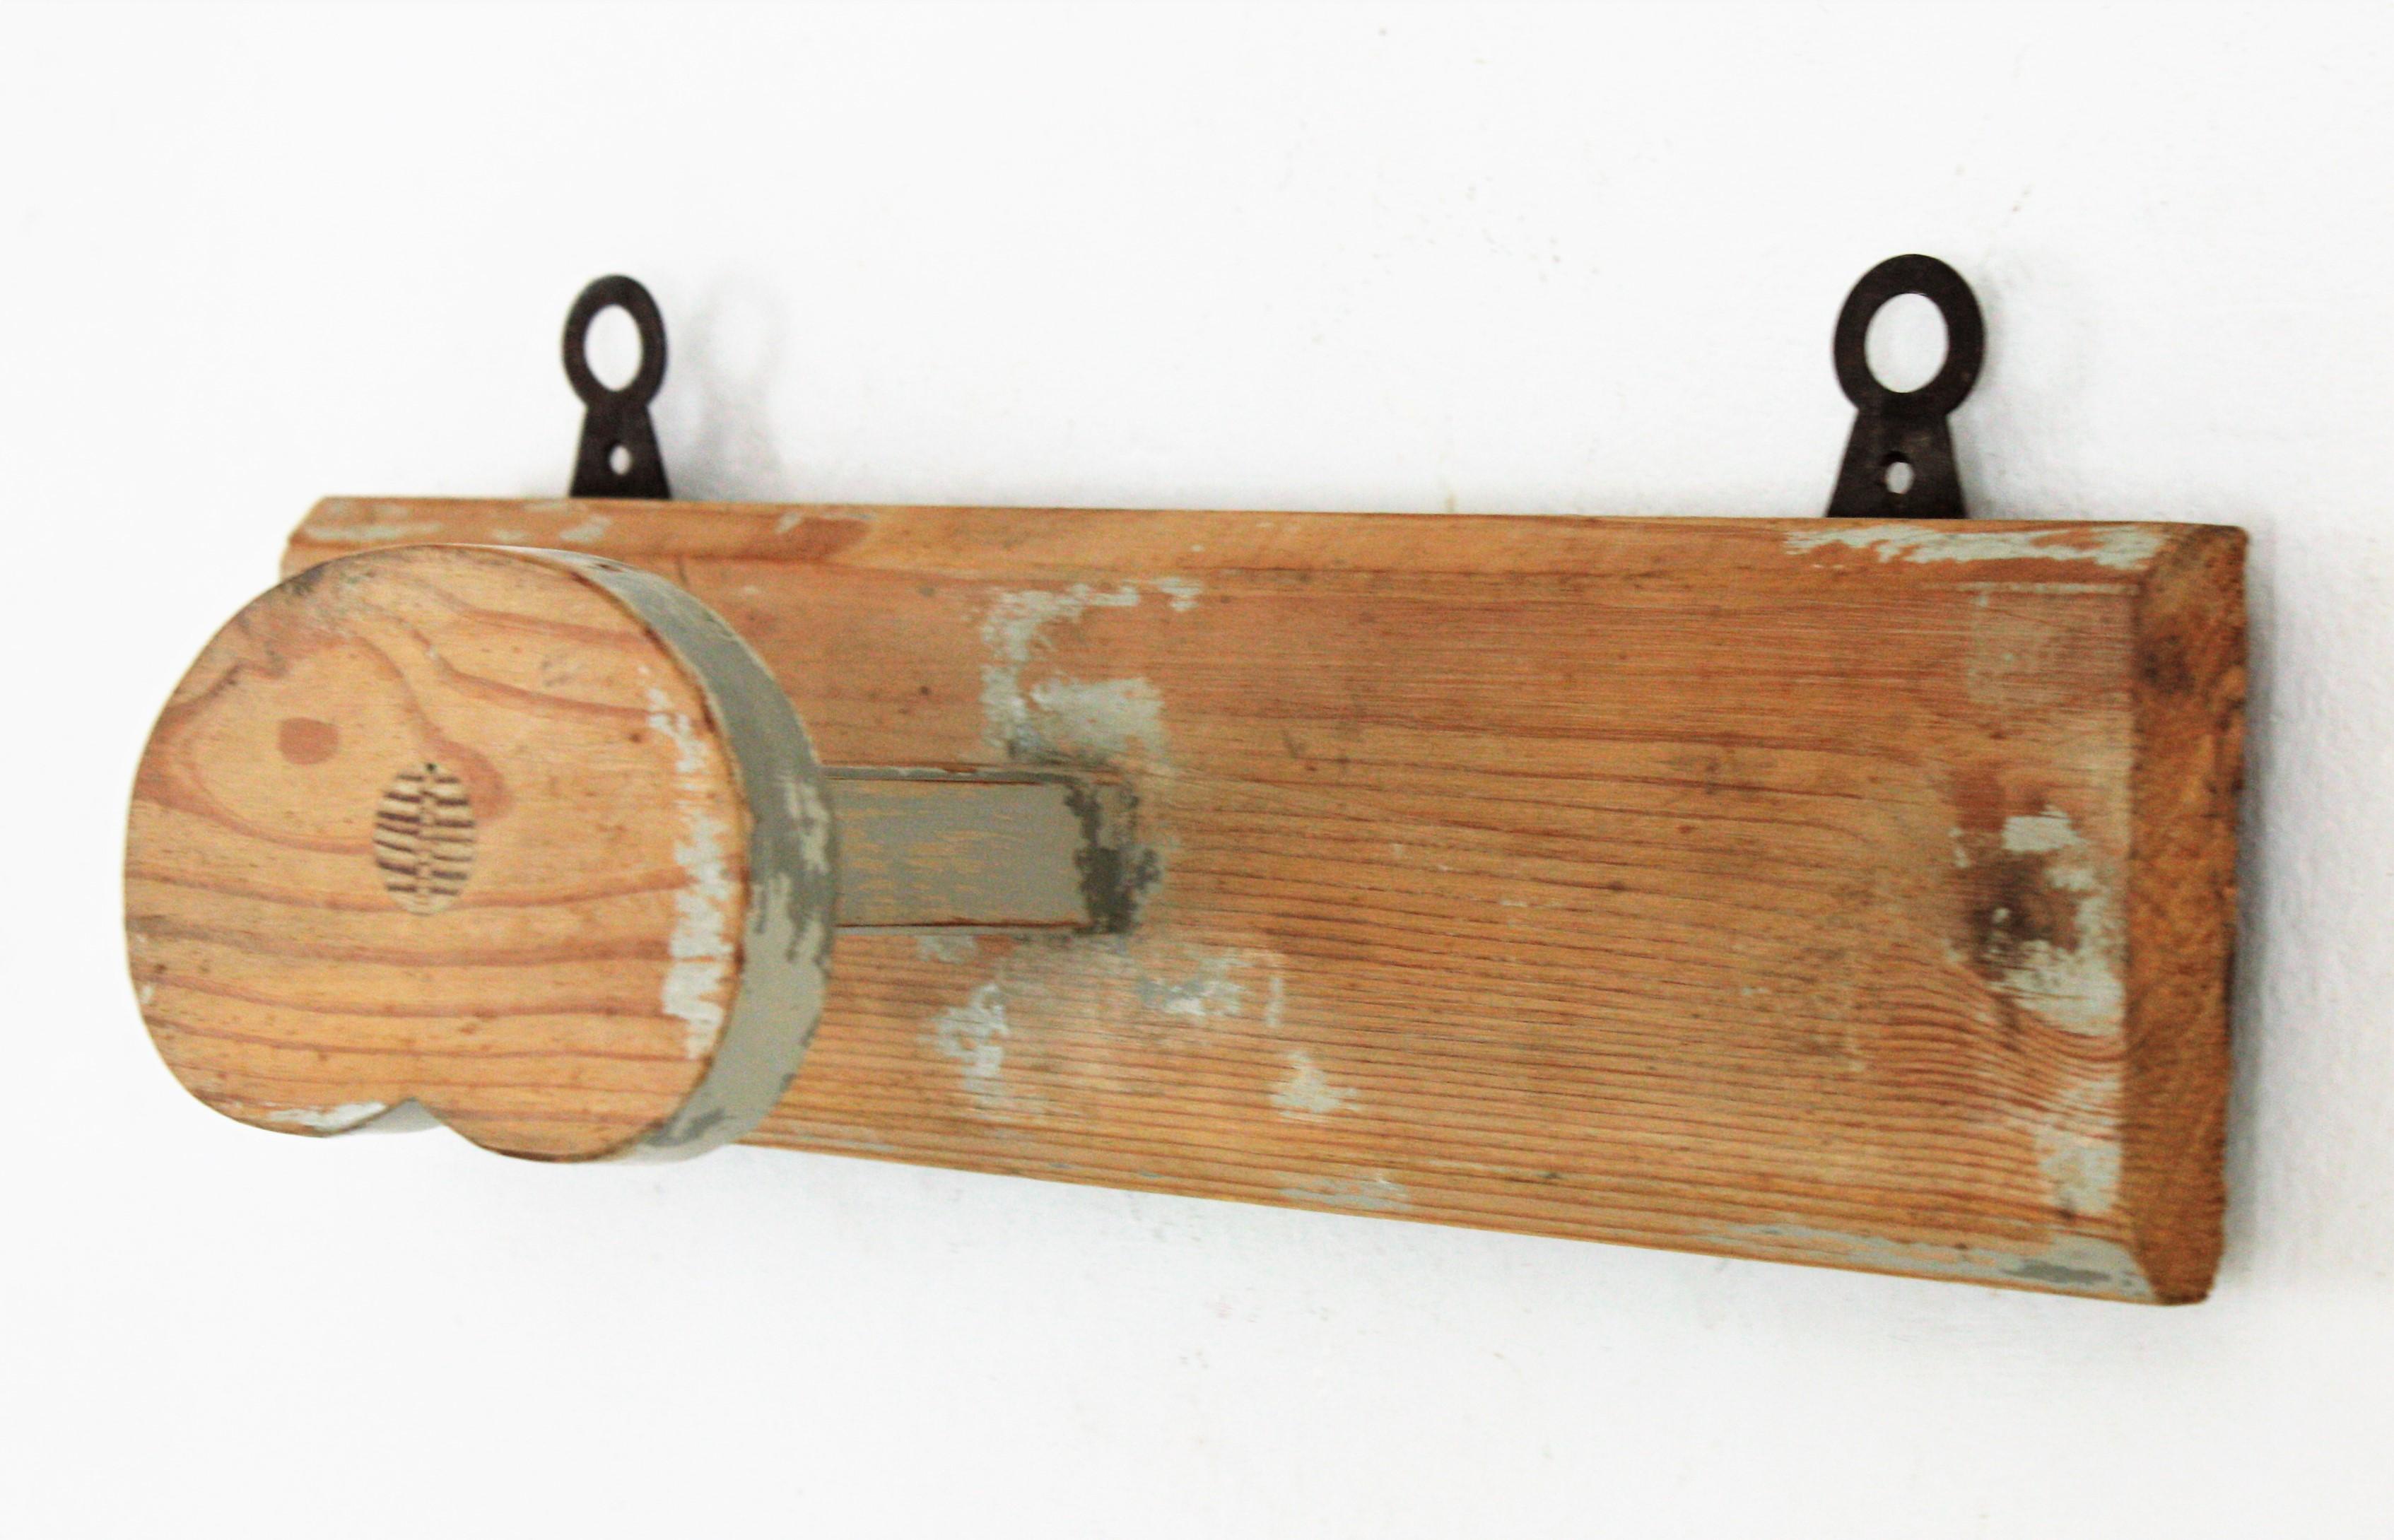 Lovely rustic wooden wall hanger with gray patinated accents, Spain, 1930s.
This stylish wall coat hanger comes from a farmhouse at the Catalan Costa Brava. It is made in pine wood with a single heart shaped hanger and 2 visible iron holders. It